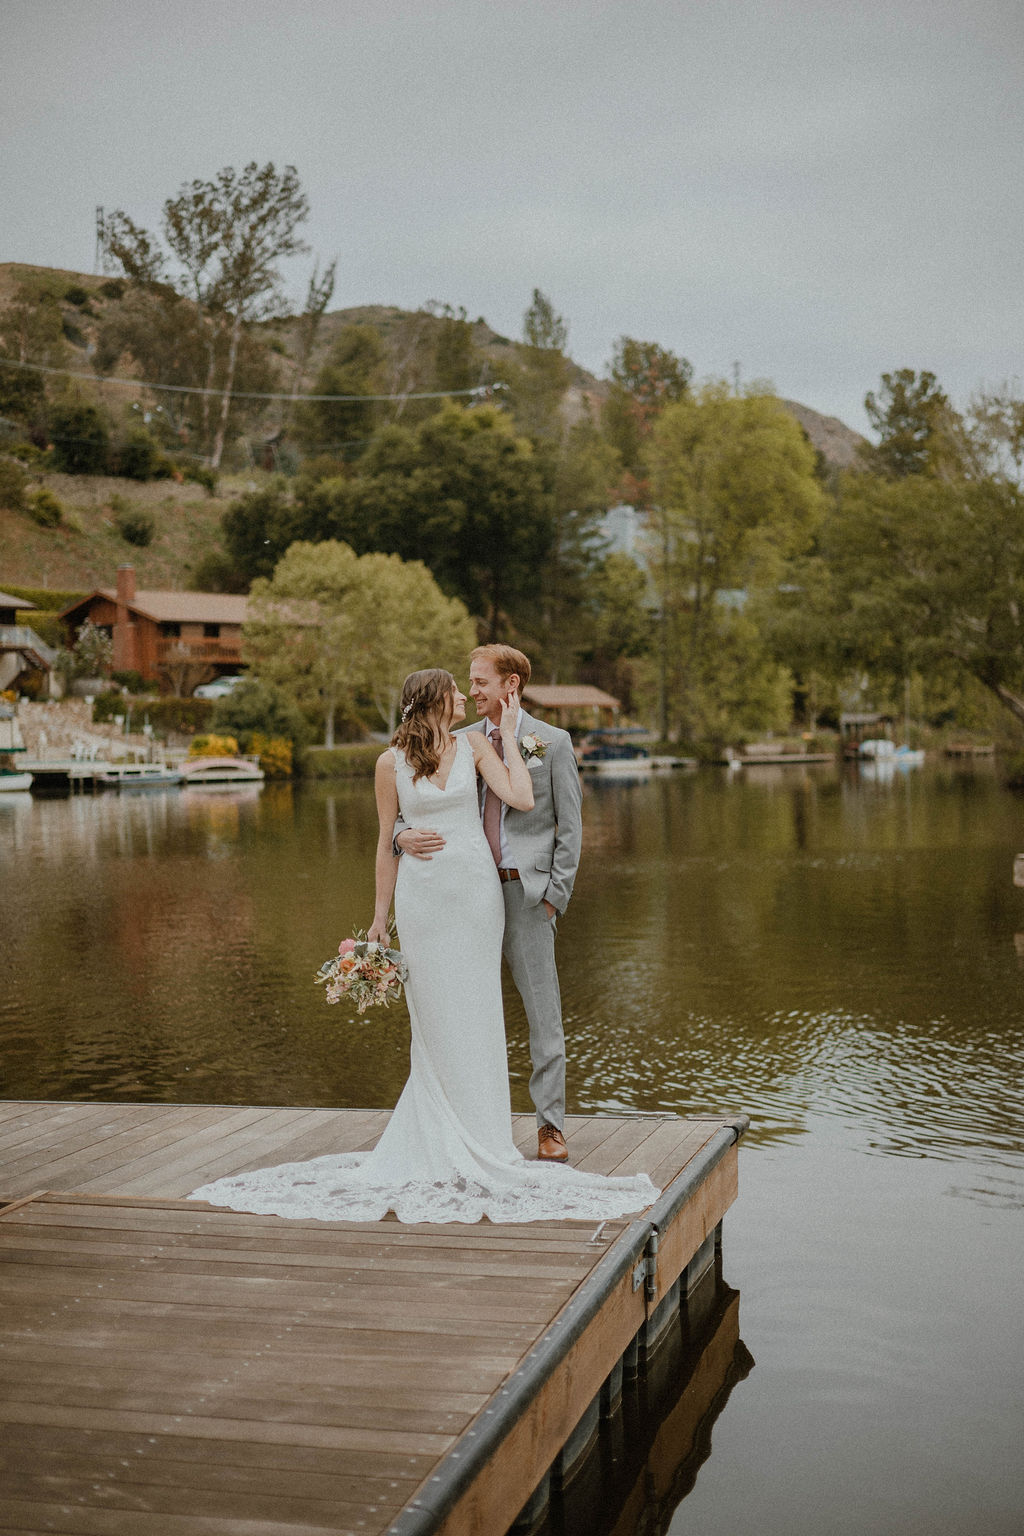 the wife gently touches the groom's cheek at the California wedding venue